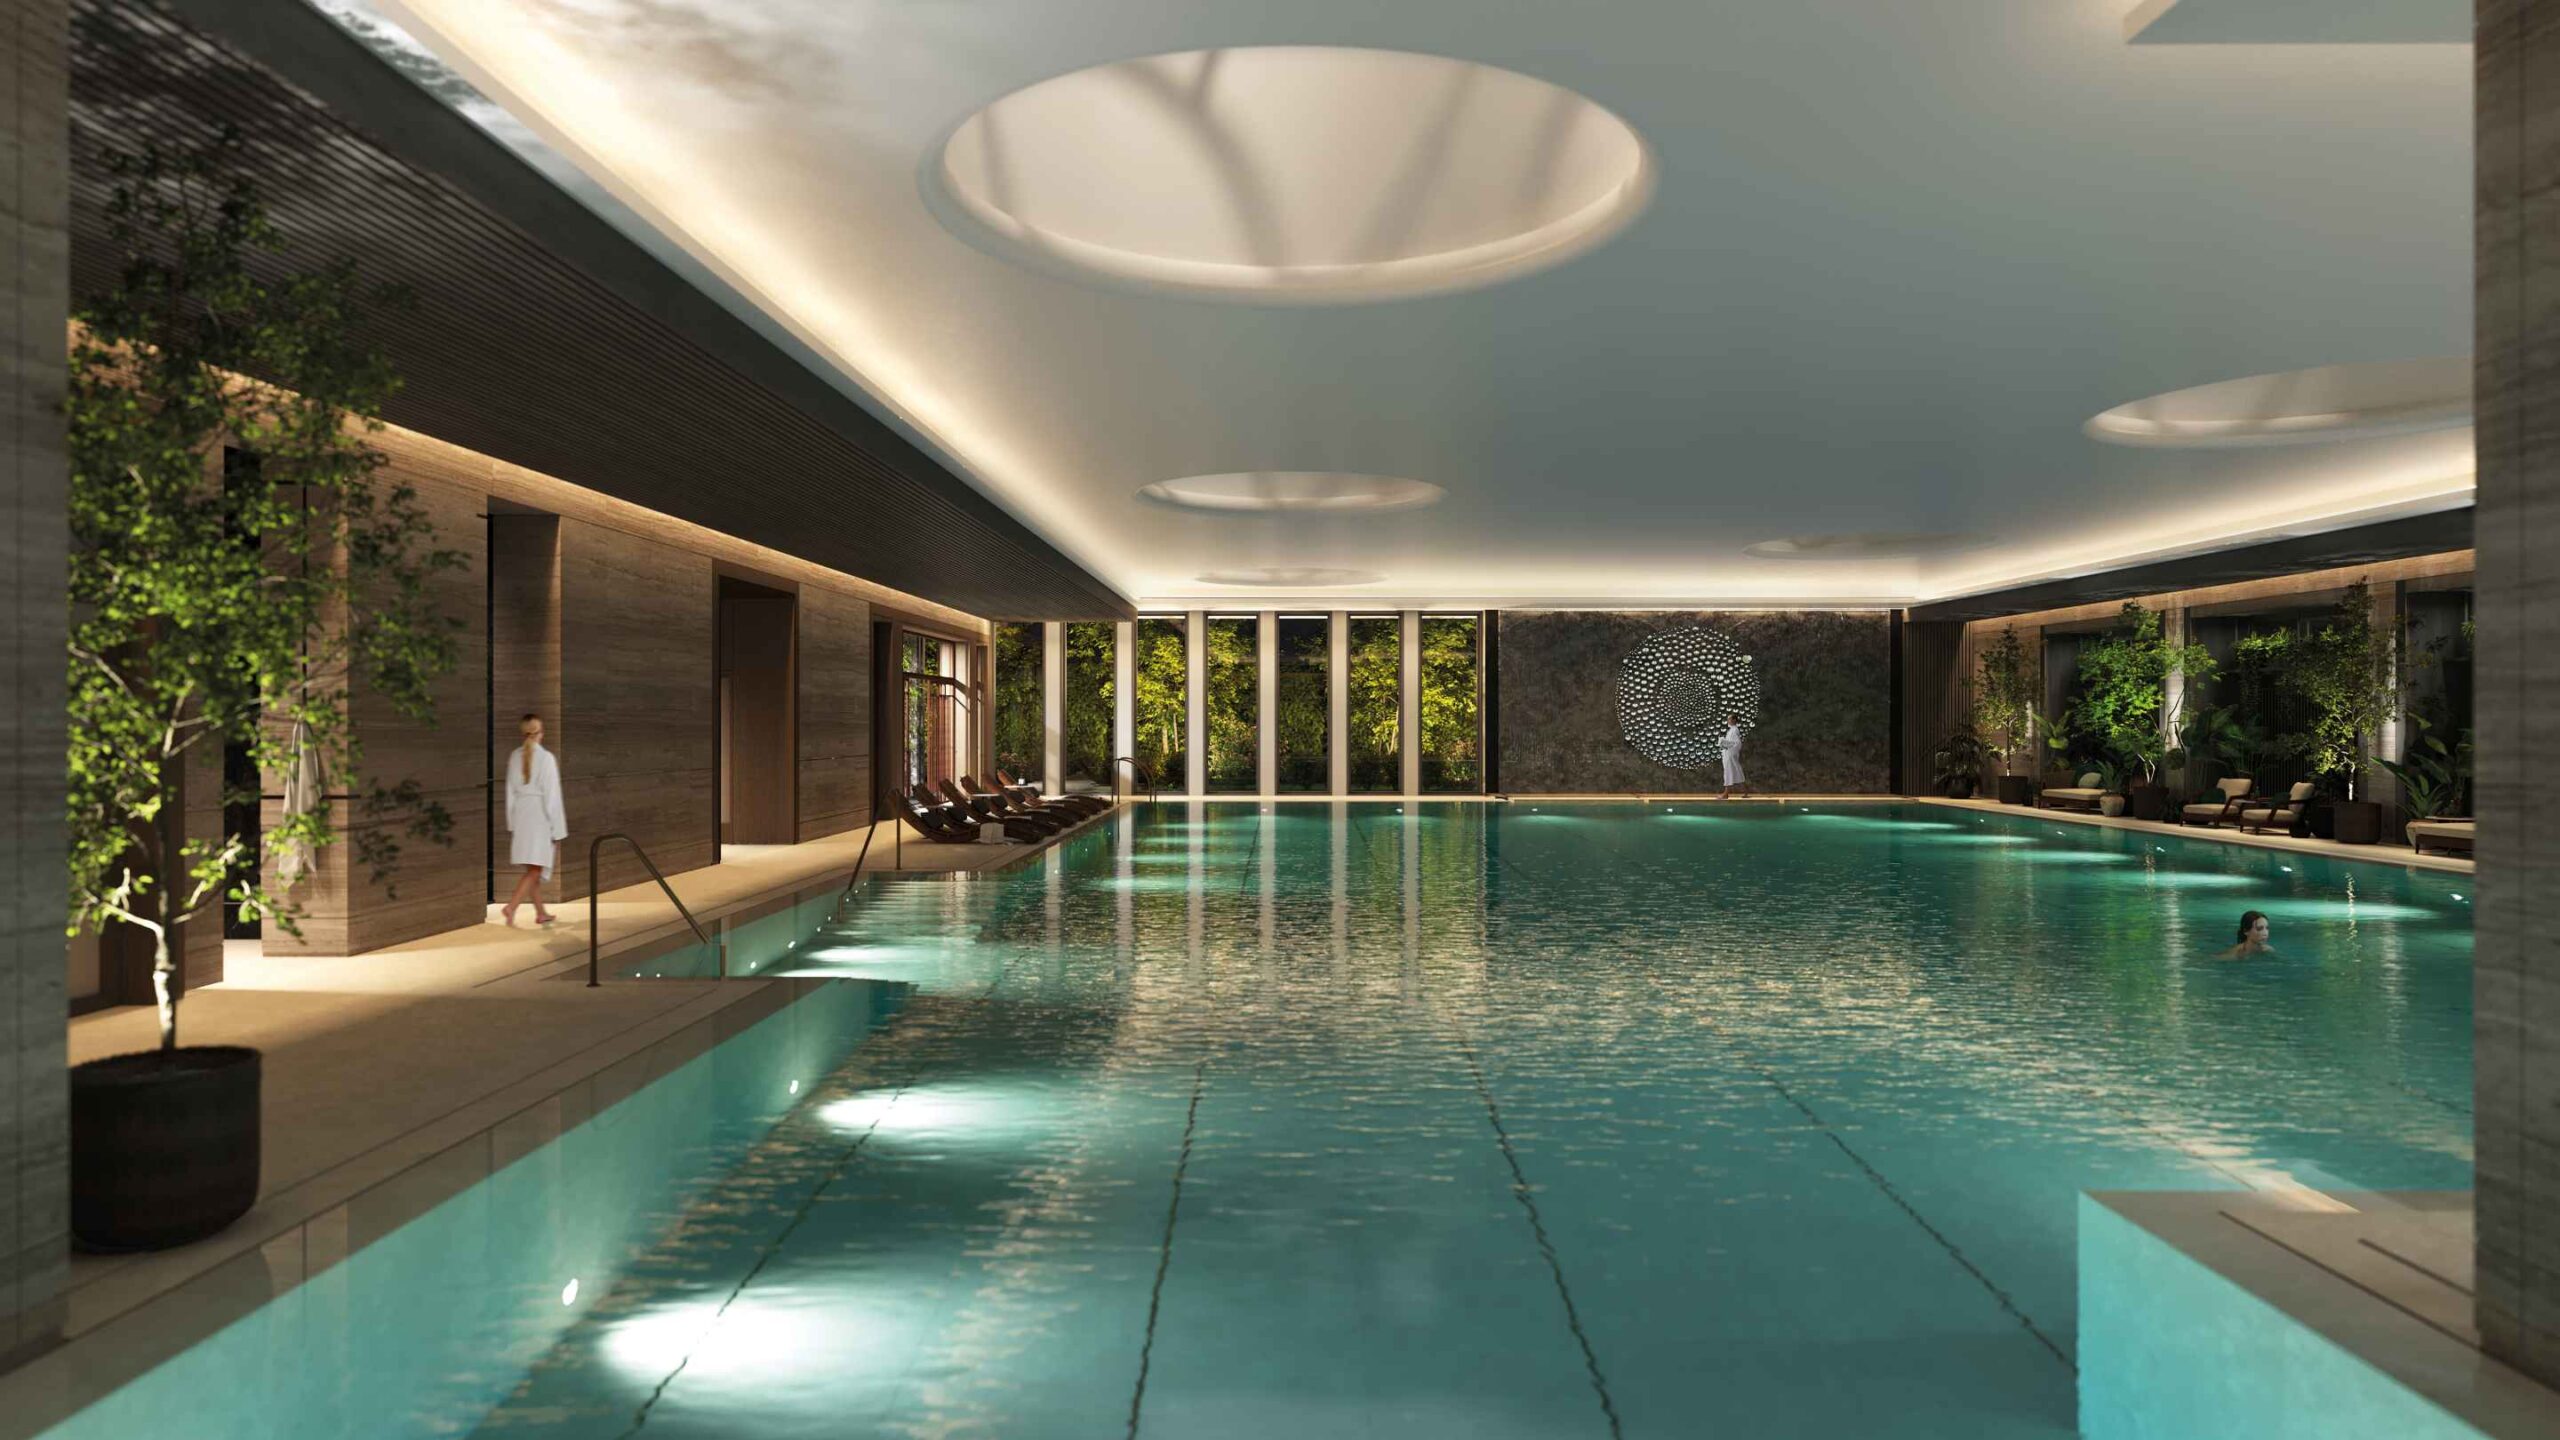 Thames City 30m pool - the largest private indoor pool in London